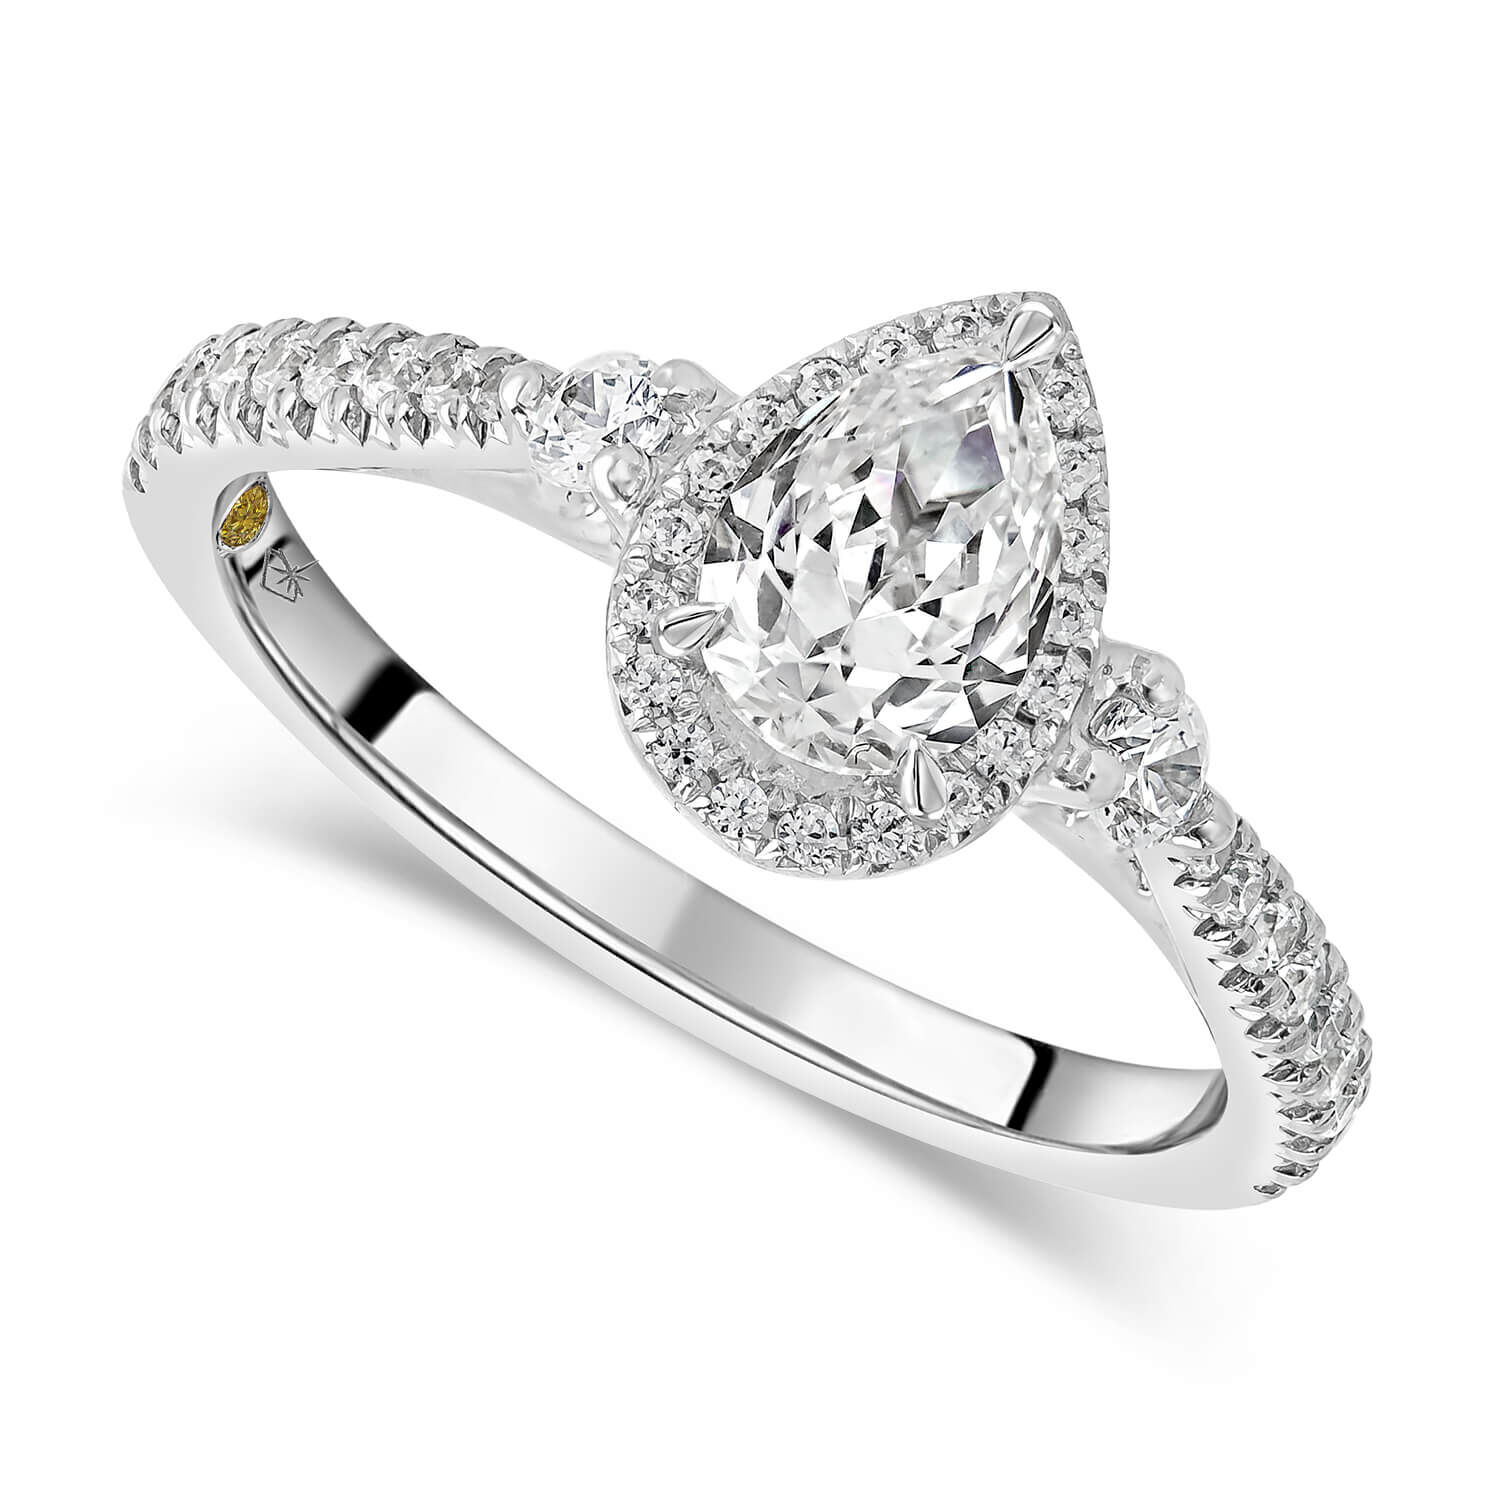 BERRICLE Sterling Silver Solitaire Wedding Engagement Rings 1.8 Carat Pear  Cut Cubic Zirconia CZ Hidden Halo Promise Ring for Women, Rhodium Plated  Size 7.5 - Walmart.com